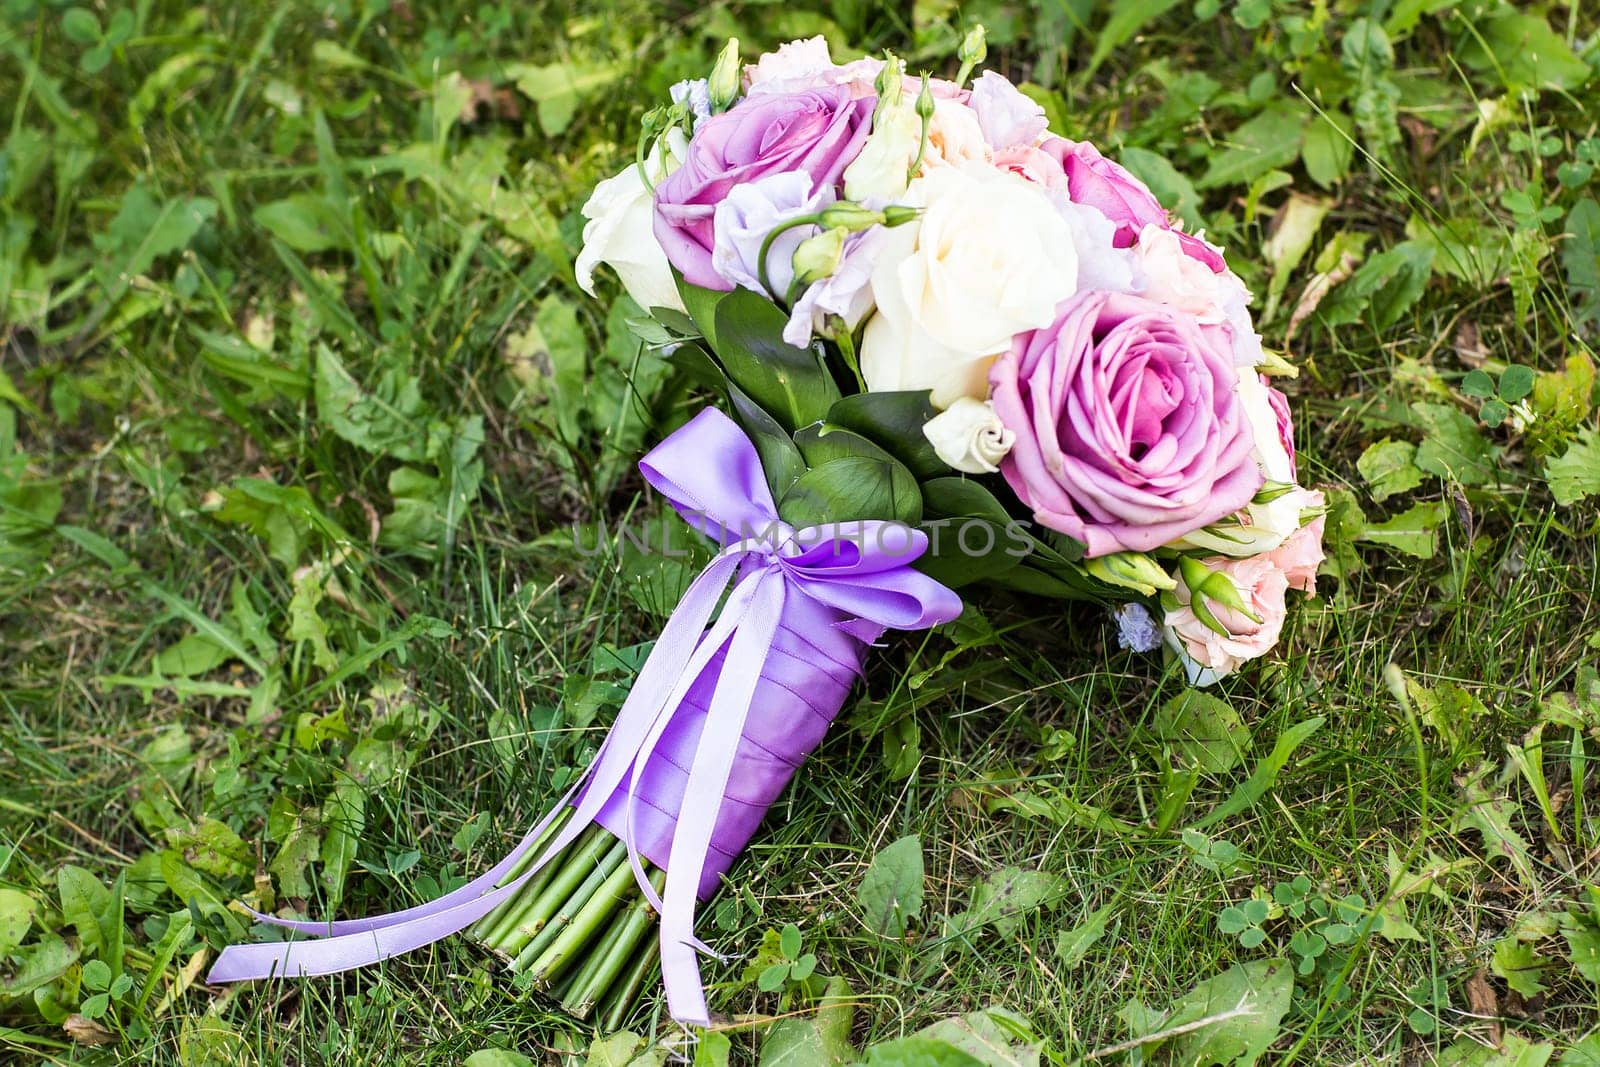 Colorful bridal bouquet by Satura86